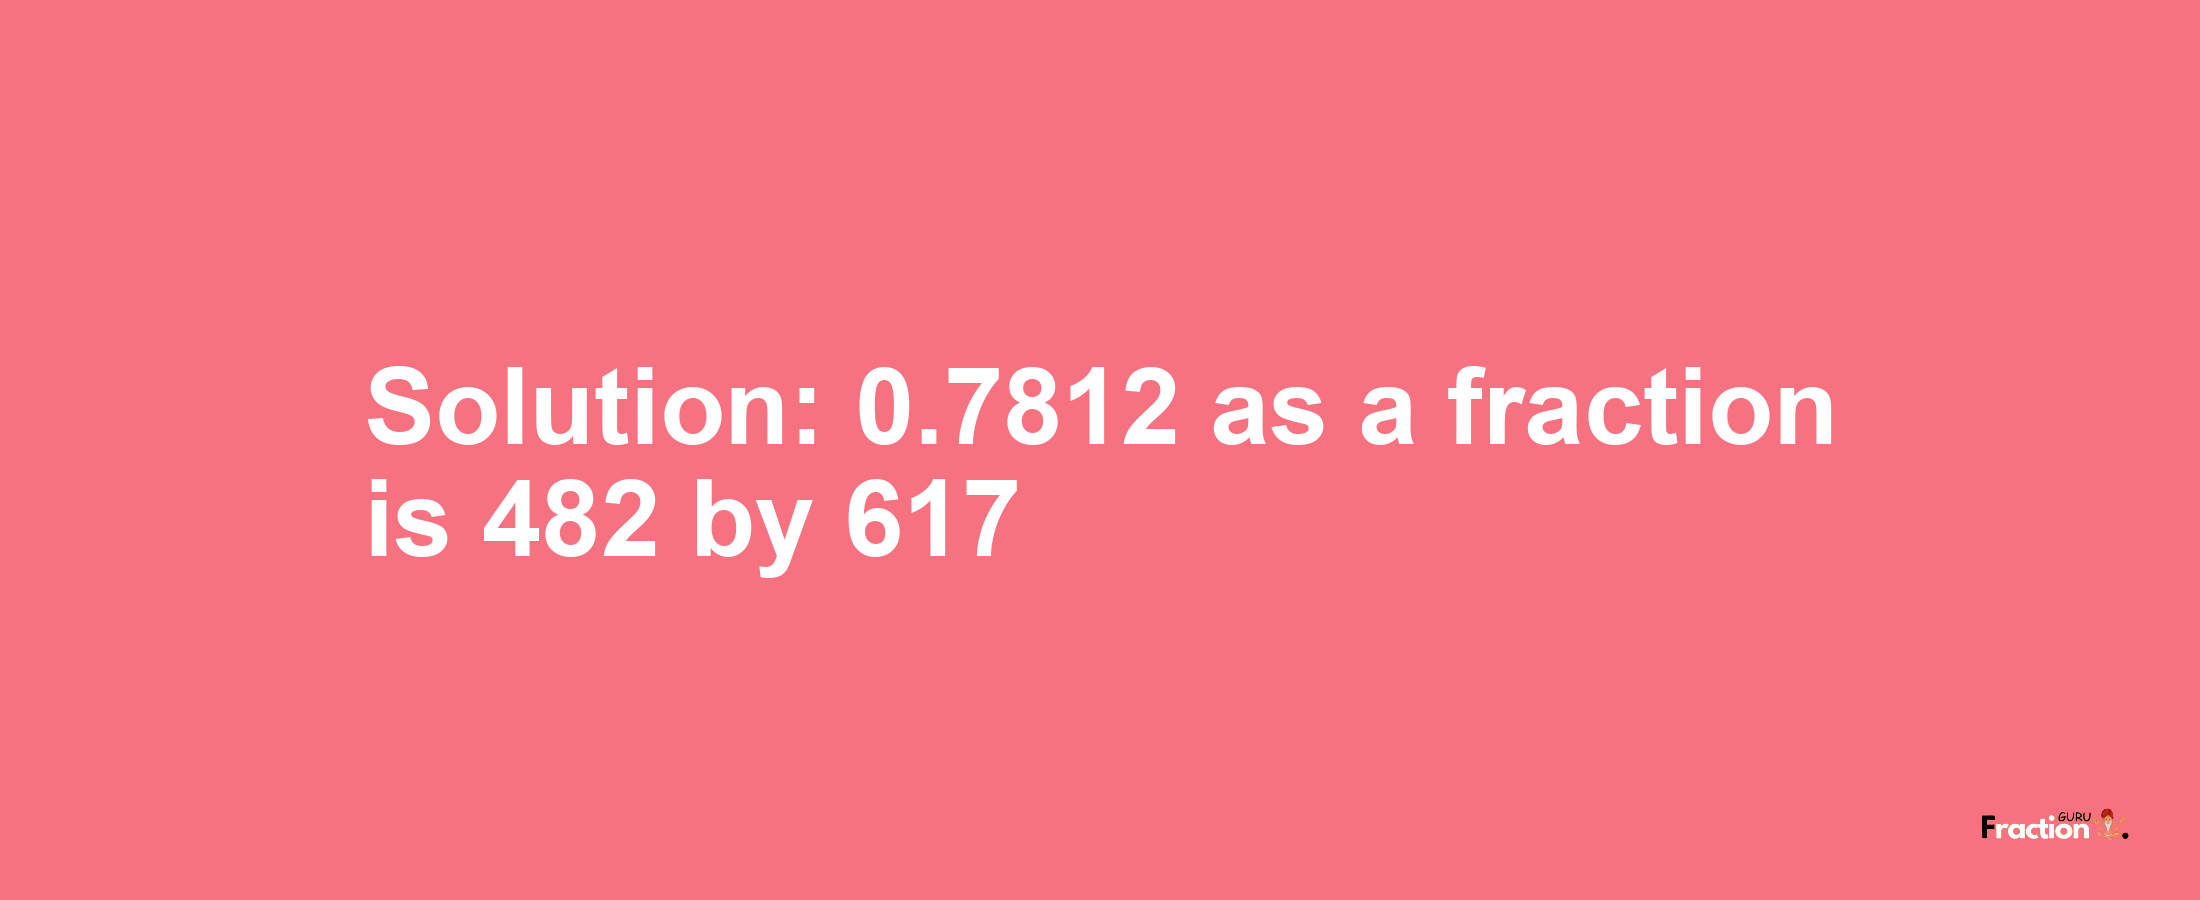 Solution:0.7812 as a fraction is 482/617